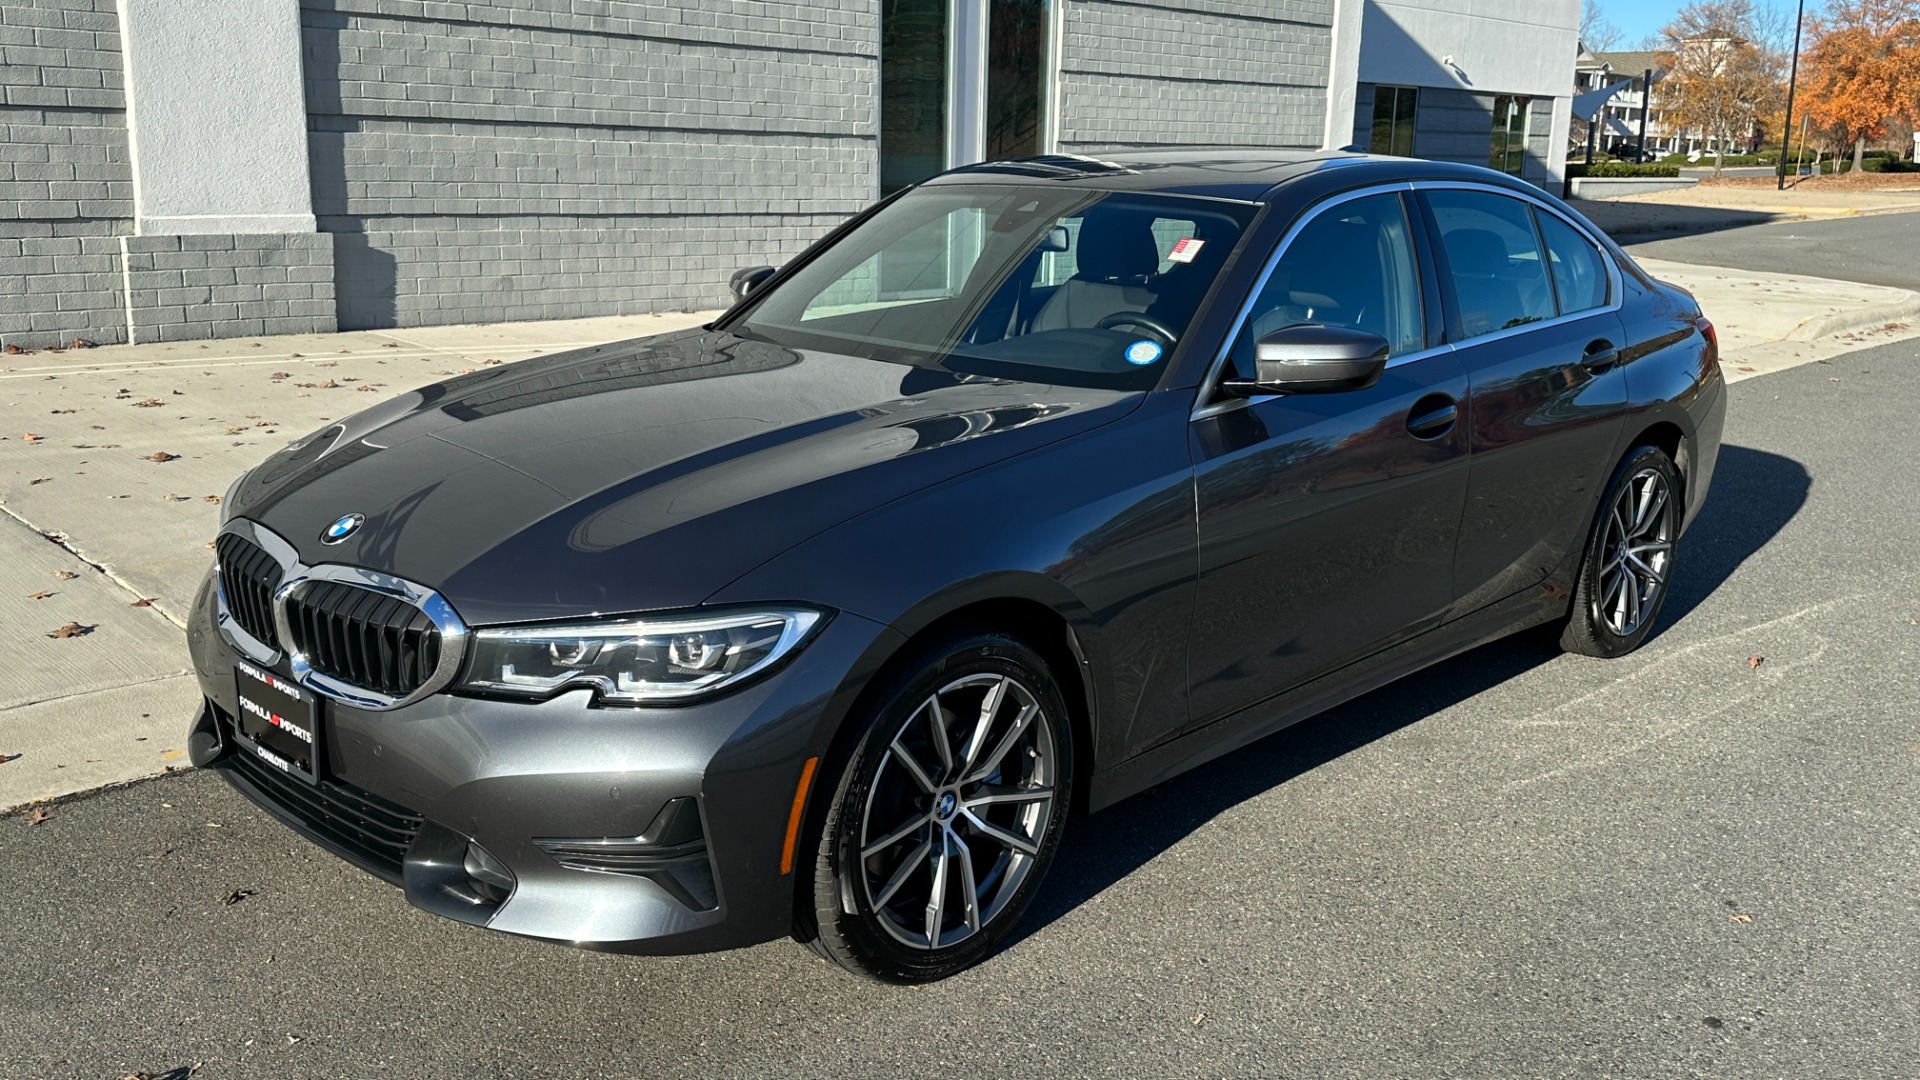 Used 2020 BMW 3 Series 330i xDRIVE / CONVENIENCE / HEATED SEATS / AMBIENT LIGHTING / REMOTE START for sale $36,995 at Formula Imports in Charlotte NC 28227 5